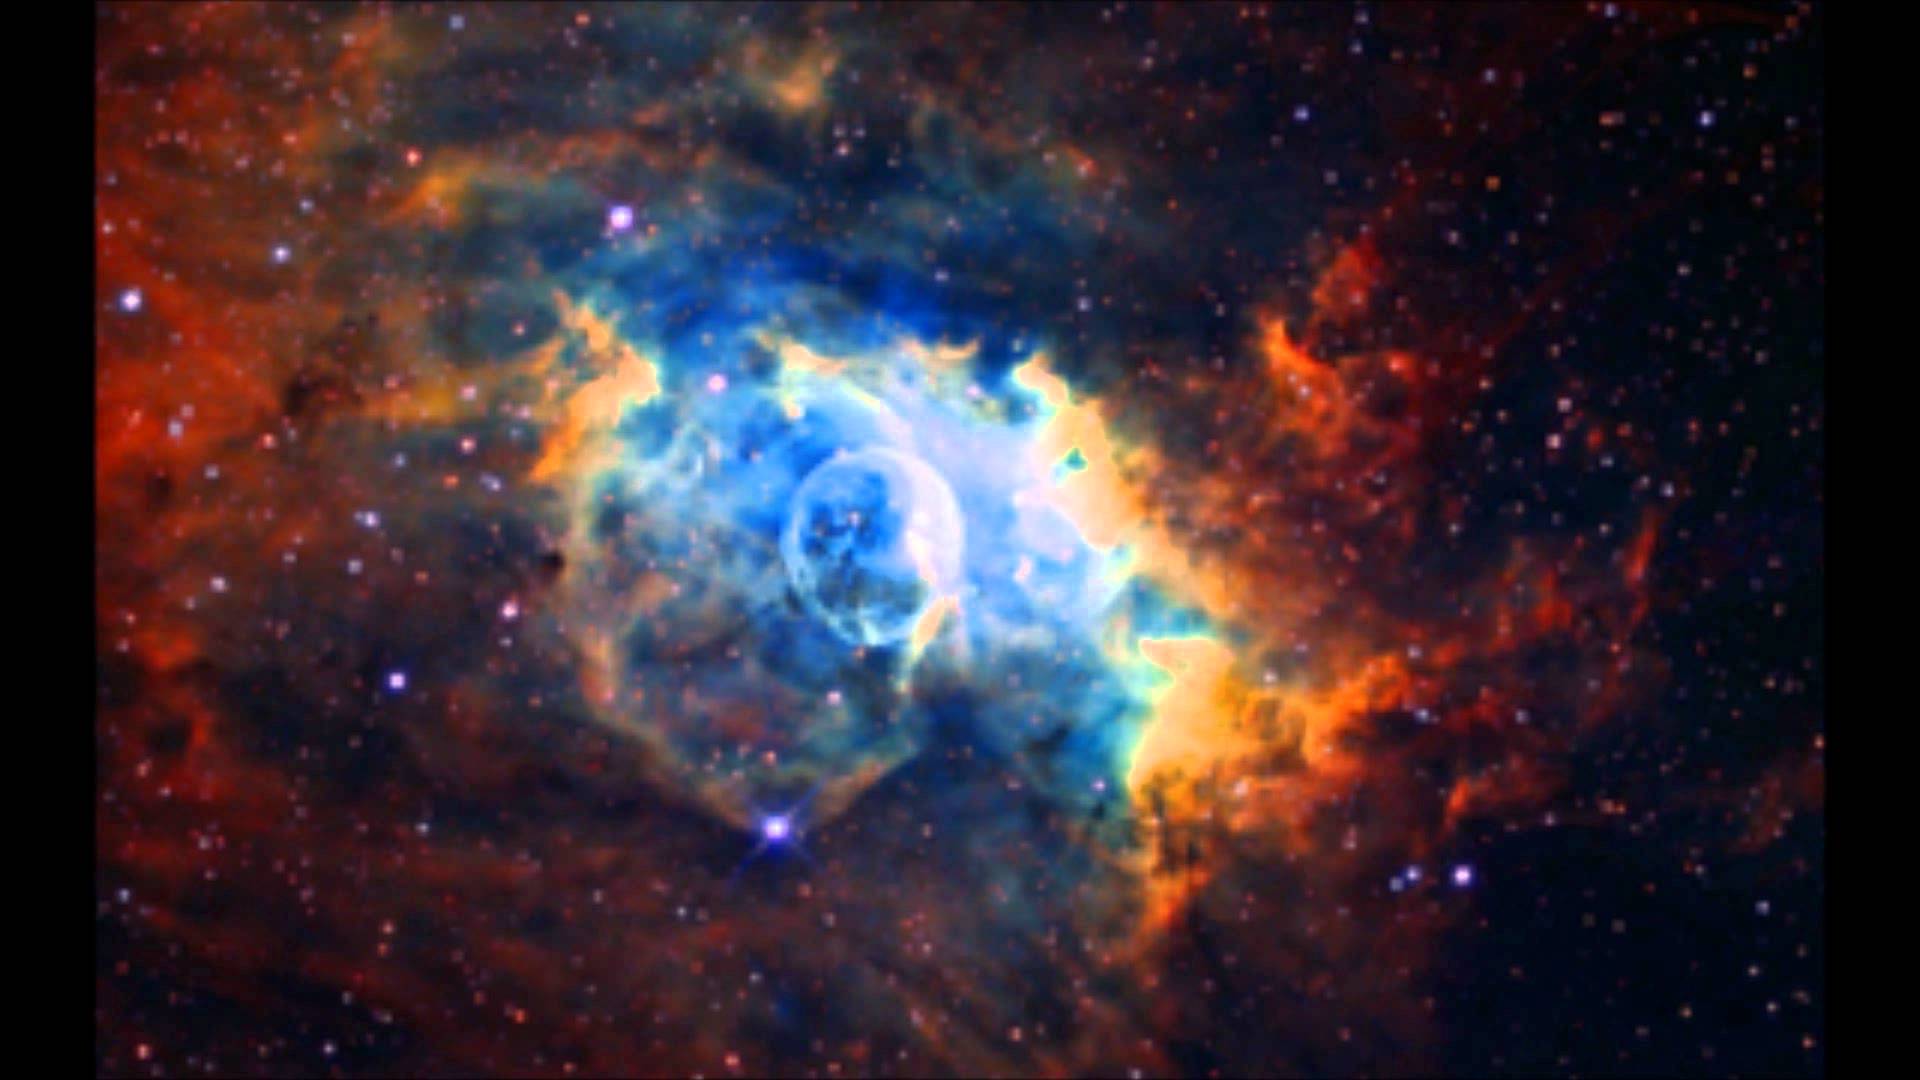 Tinie Tempah Written in the stars and cool space pictures - YouTube